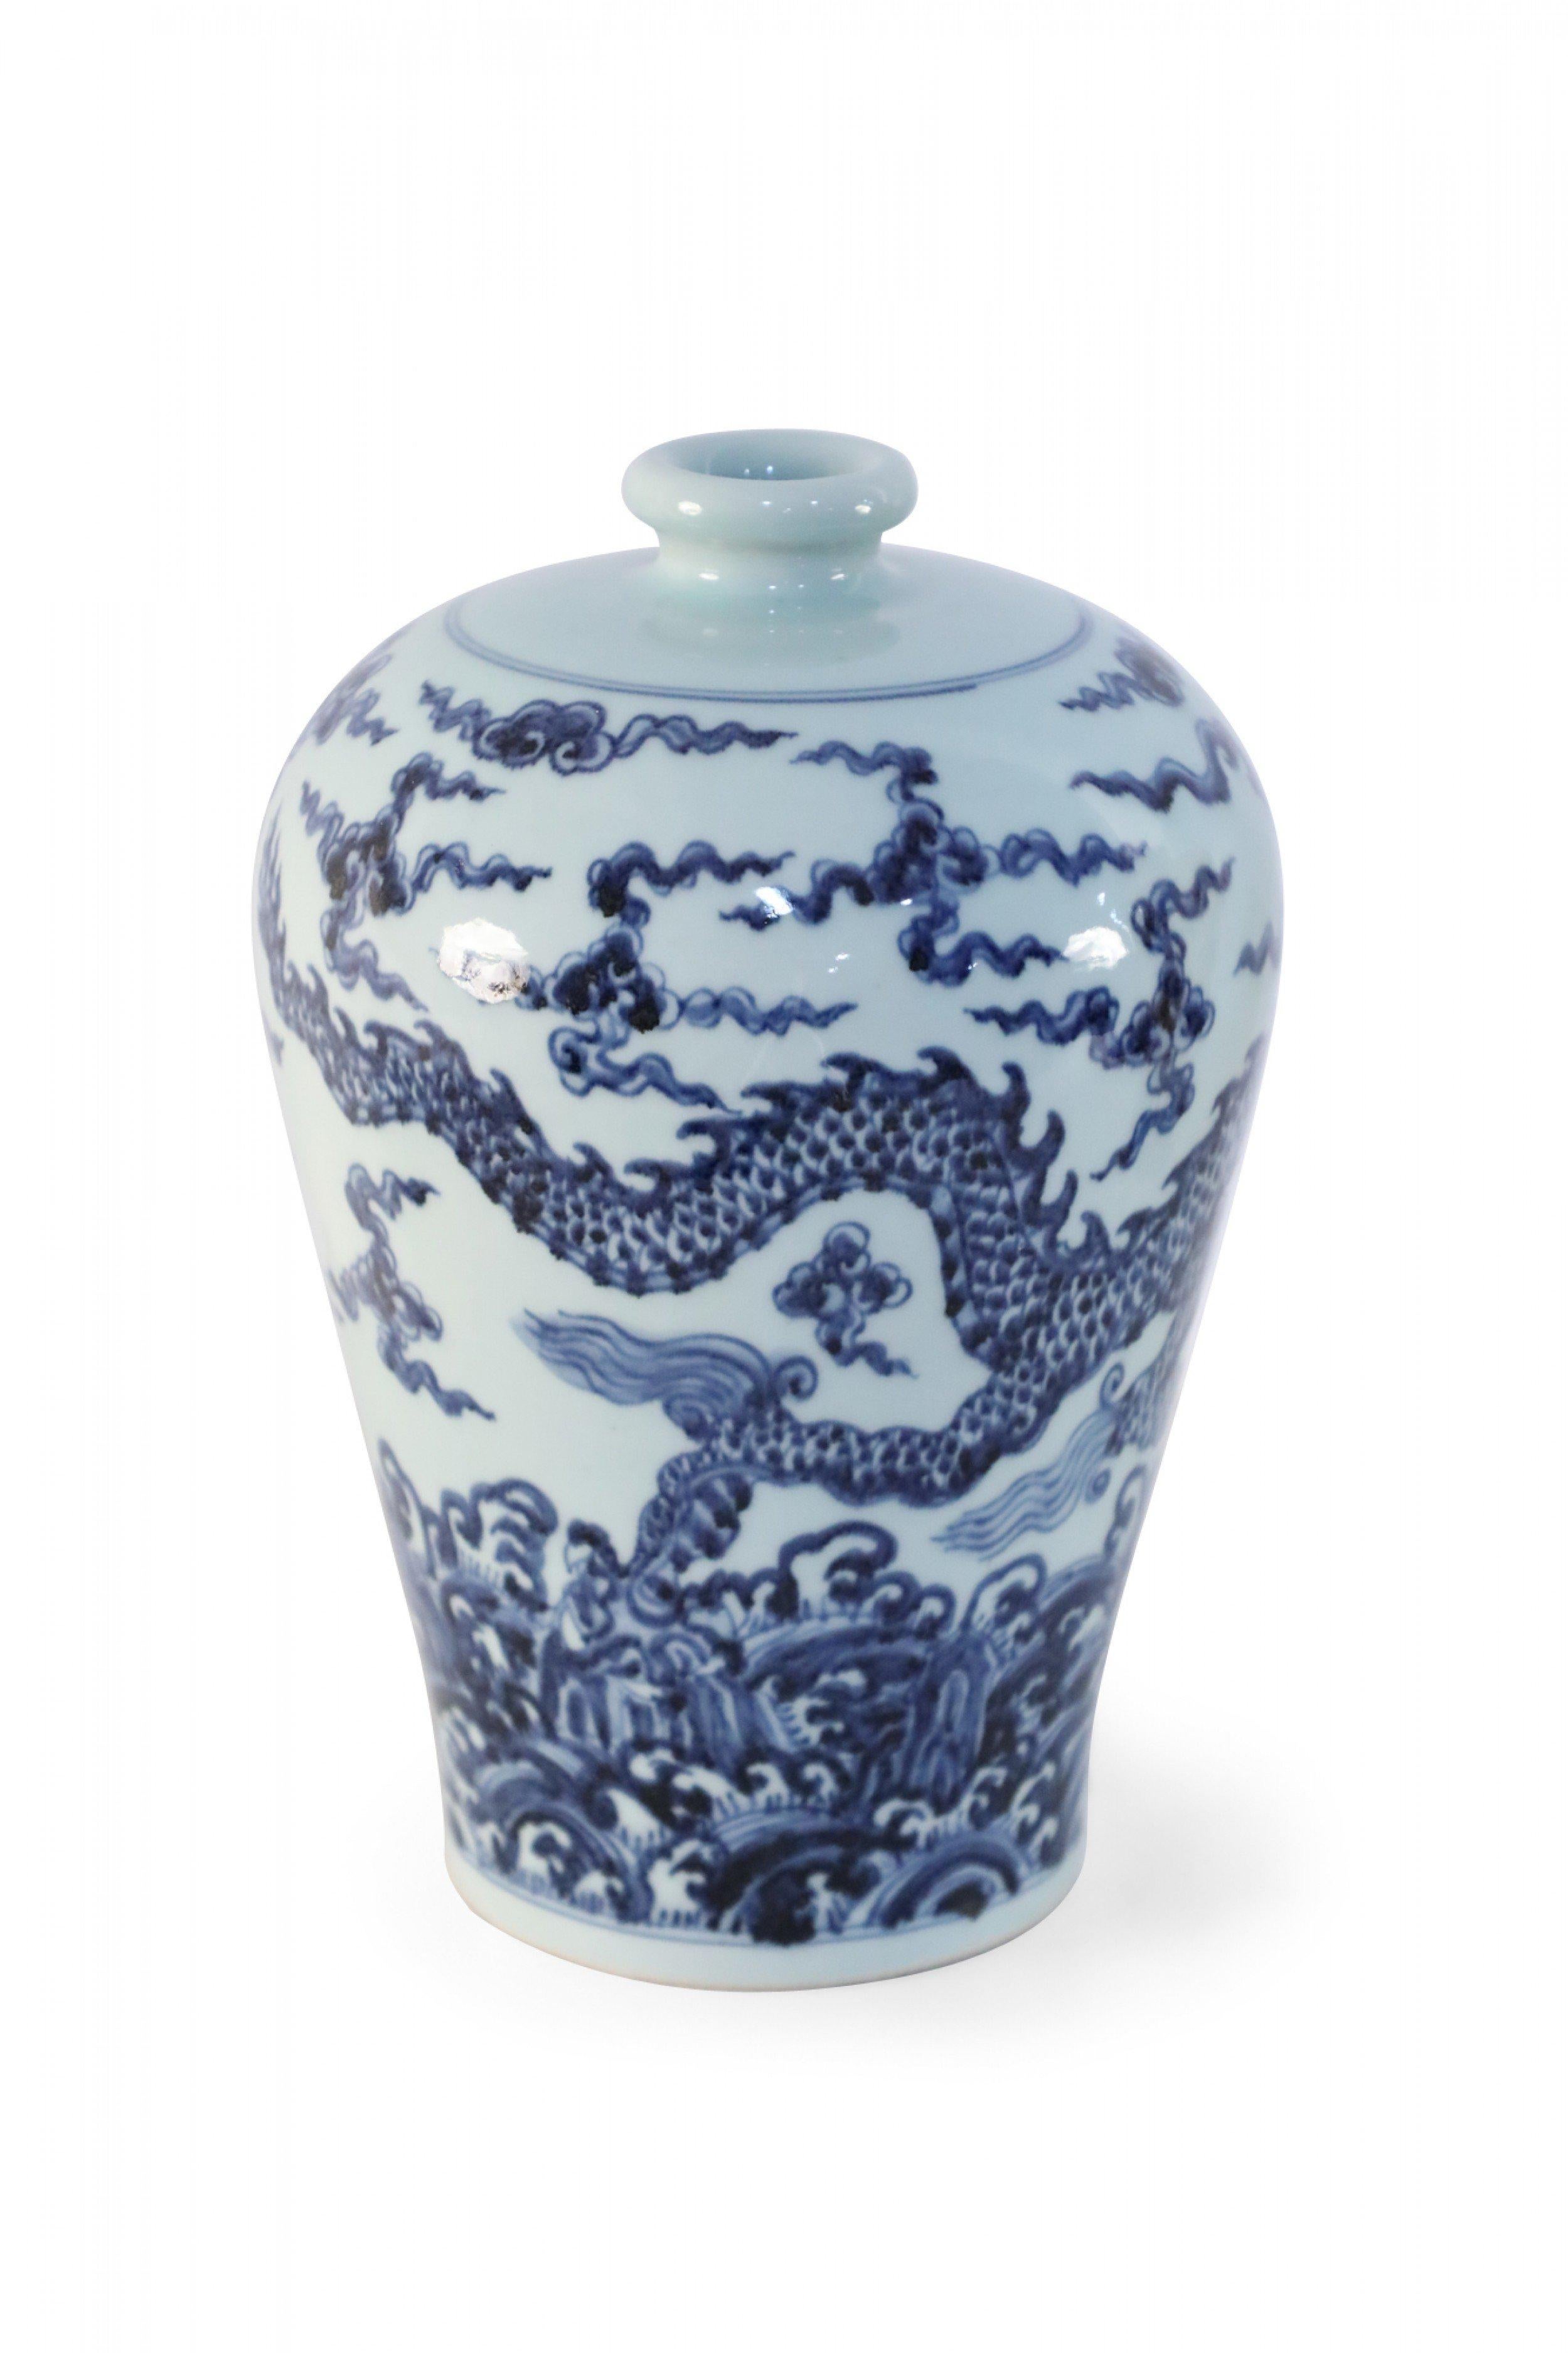 Antique Chinese (Late 17th Century-style) white porcelain Meiping vase decorated in a swirling blue dragon motif.
 